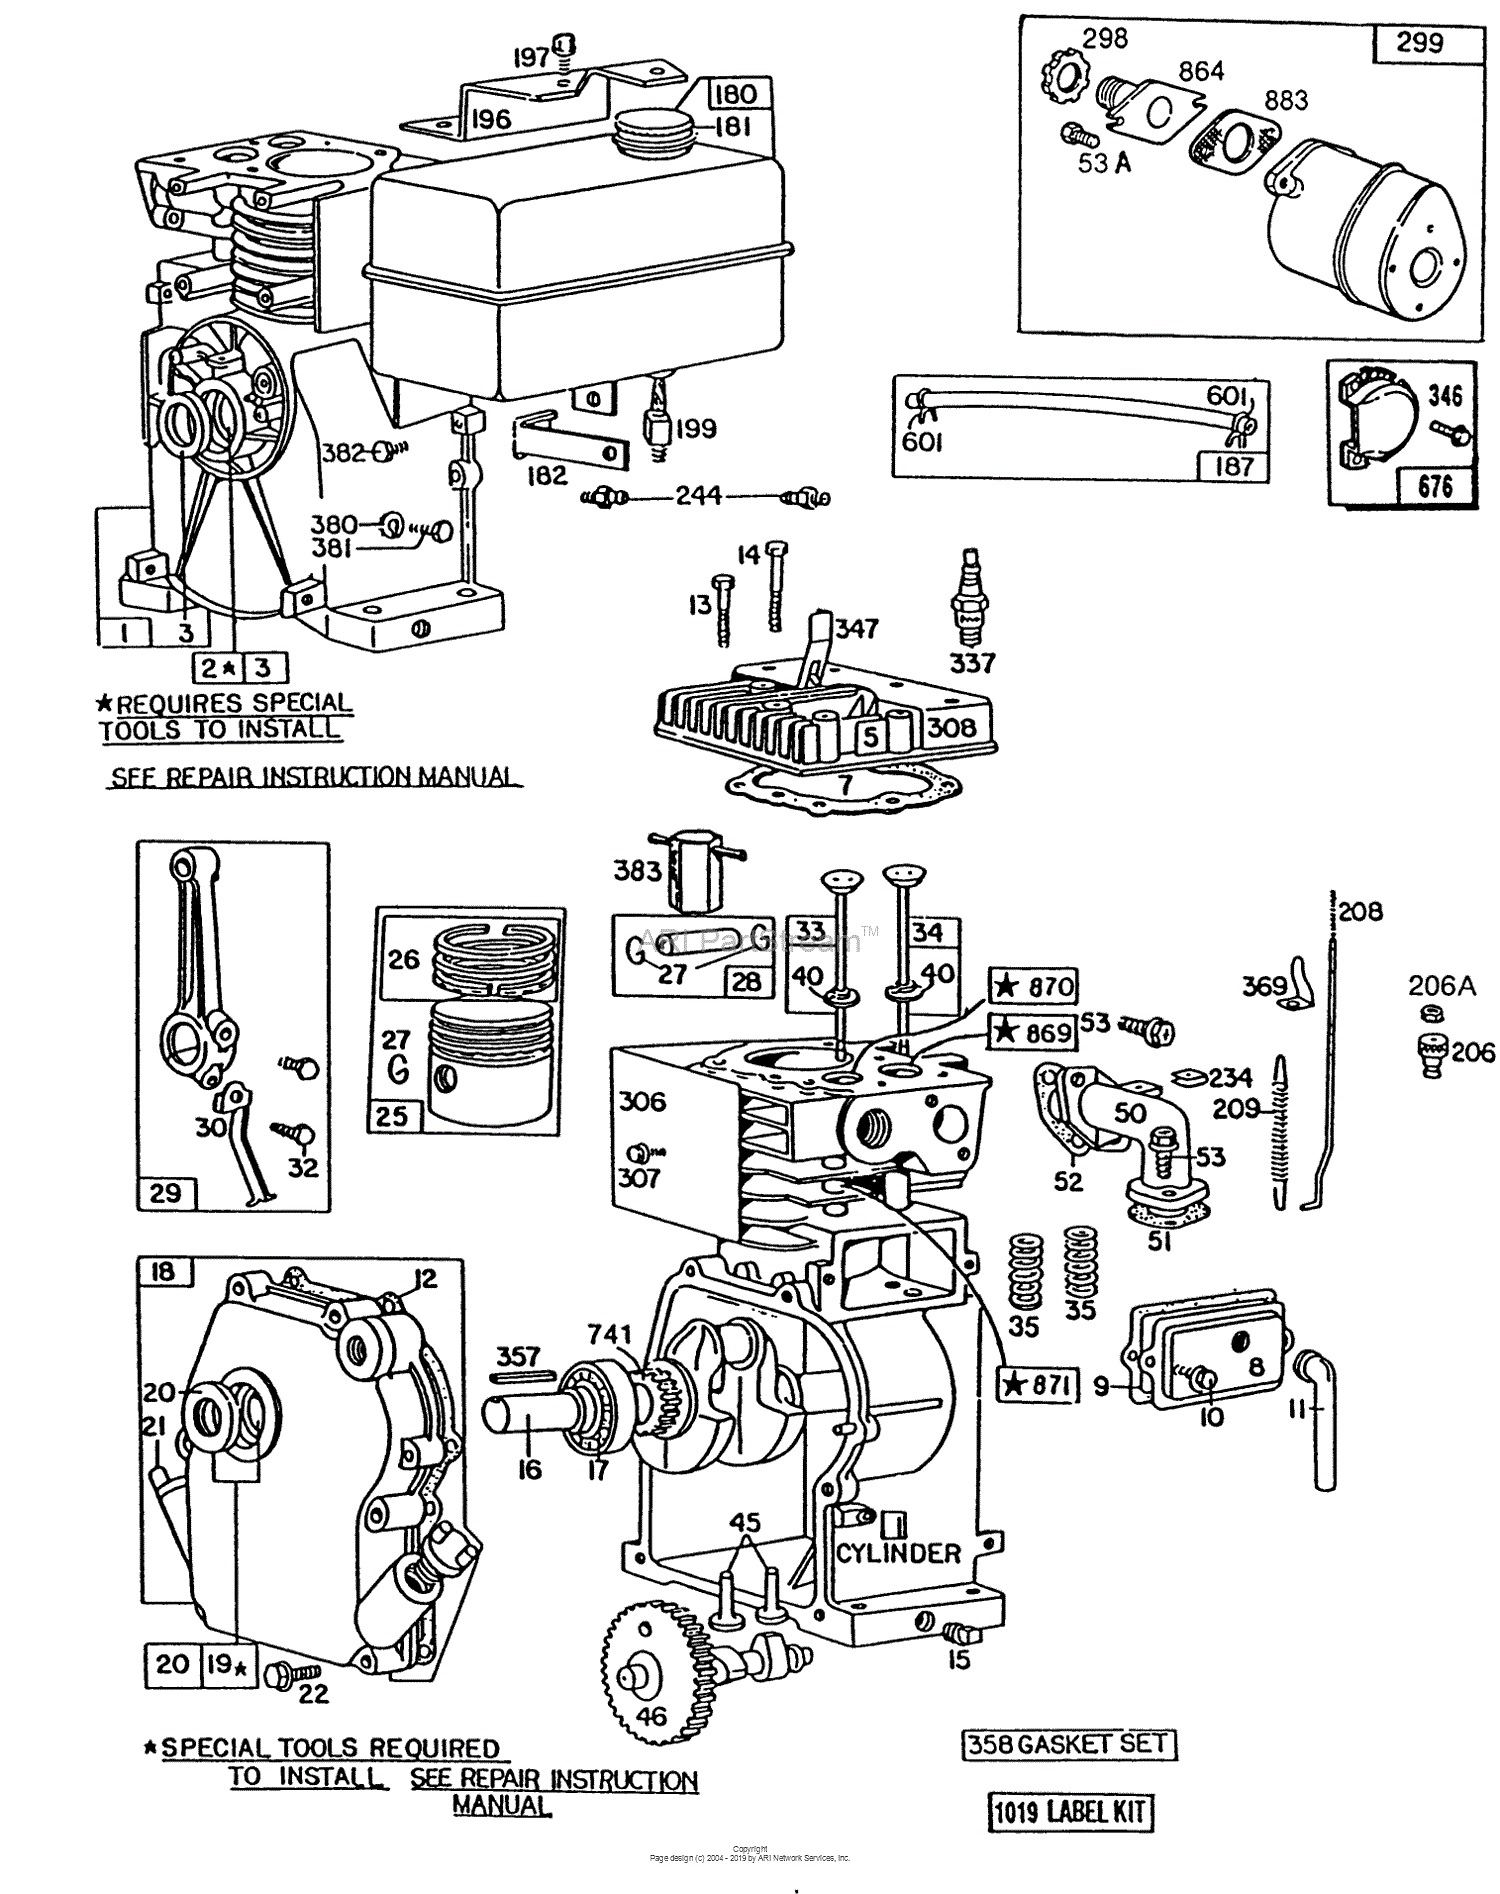 Load Wiring Briggs And Stratton 145 Ohv Wiring Diagram